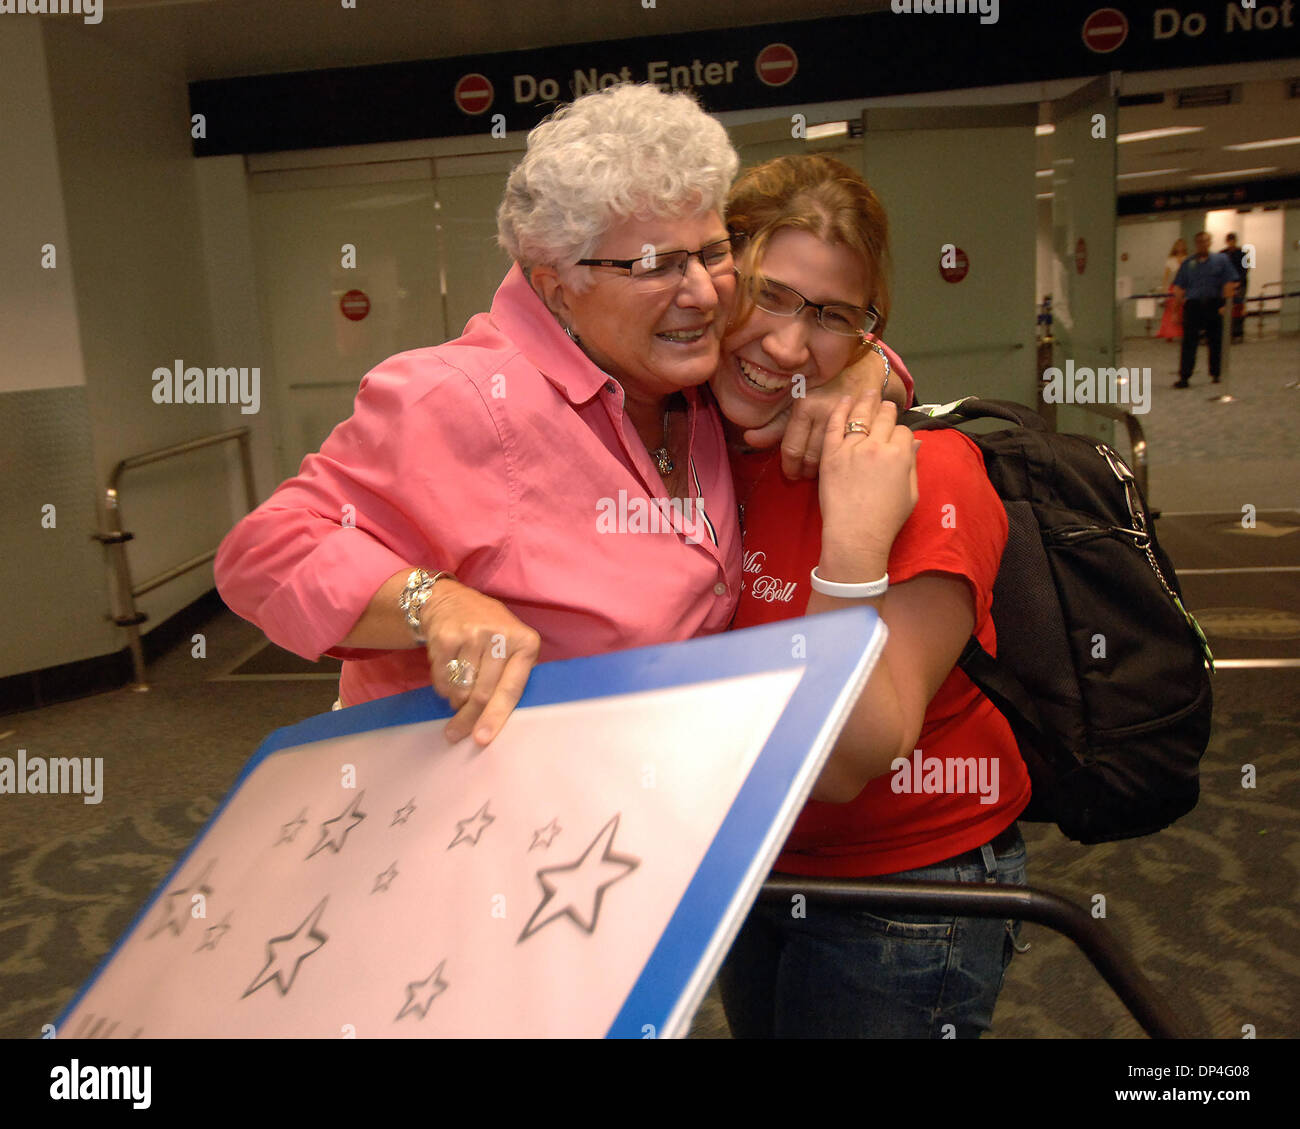 Aug 11, 2006; Miami, FL, USA;  Debbie Robins form Coral Springs Florida, embraces her daughter Rachel Robins, 20 after arriving from Heathrow Airport in London Friday, Aug. 11, 2006 at Miami International Airport. Mandatory Credit: Photo by Steve Mitchell/Palm Beach Post/ZUMA Press. (©) Copyright 2006 by Palm Beach Post Stock Photo